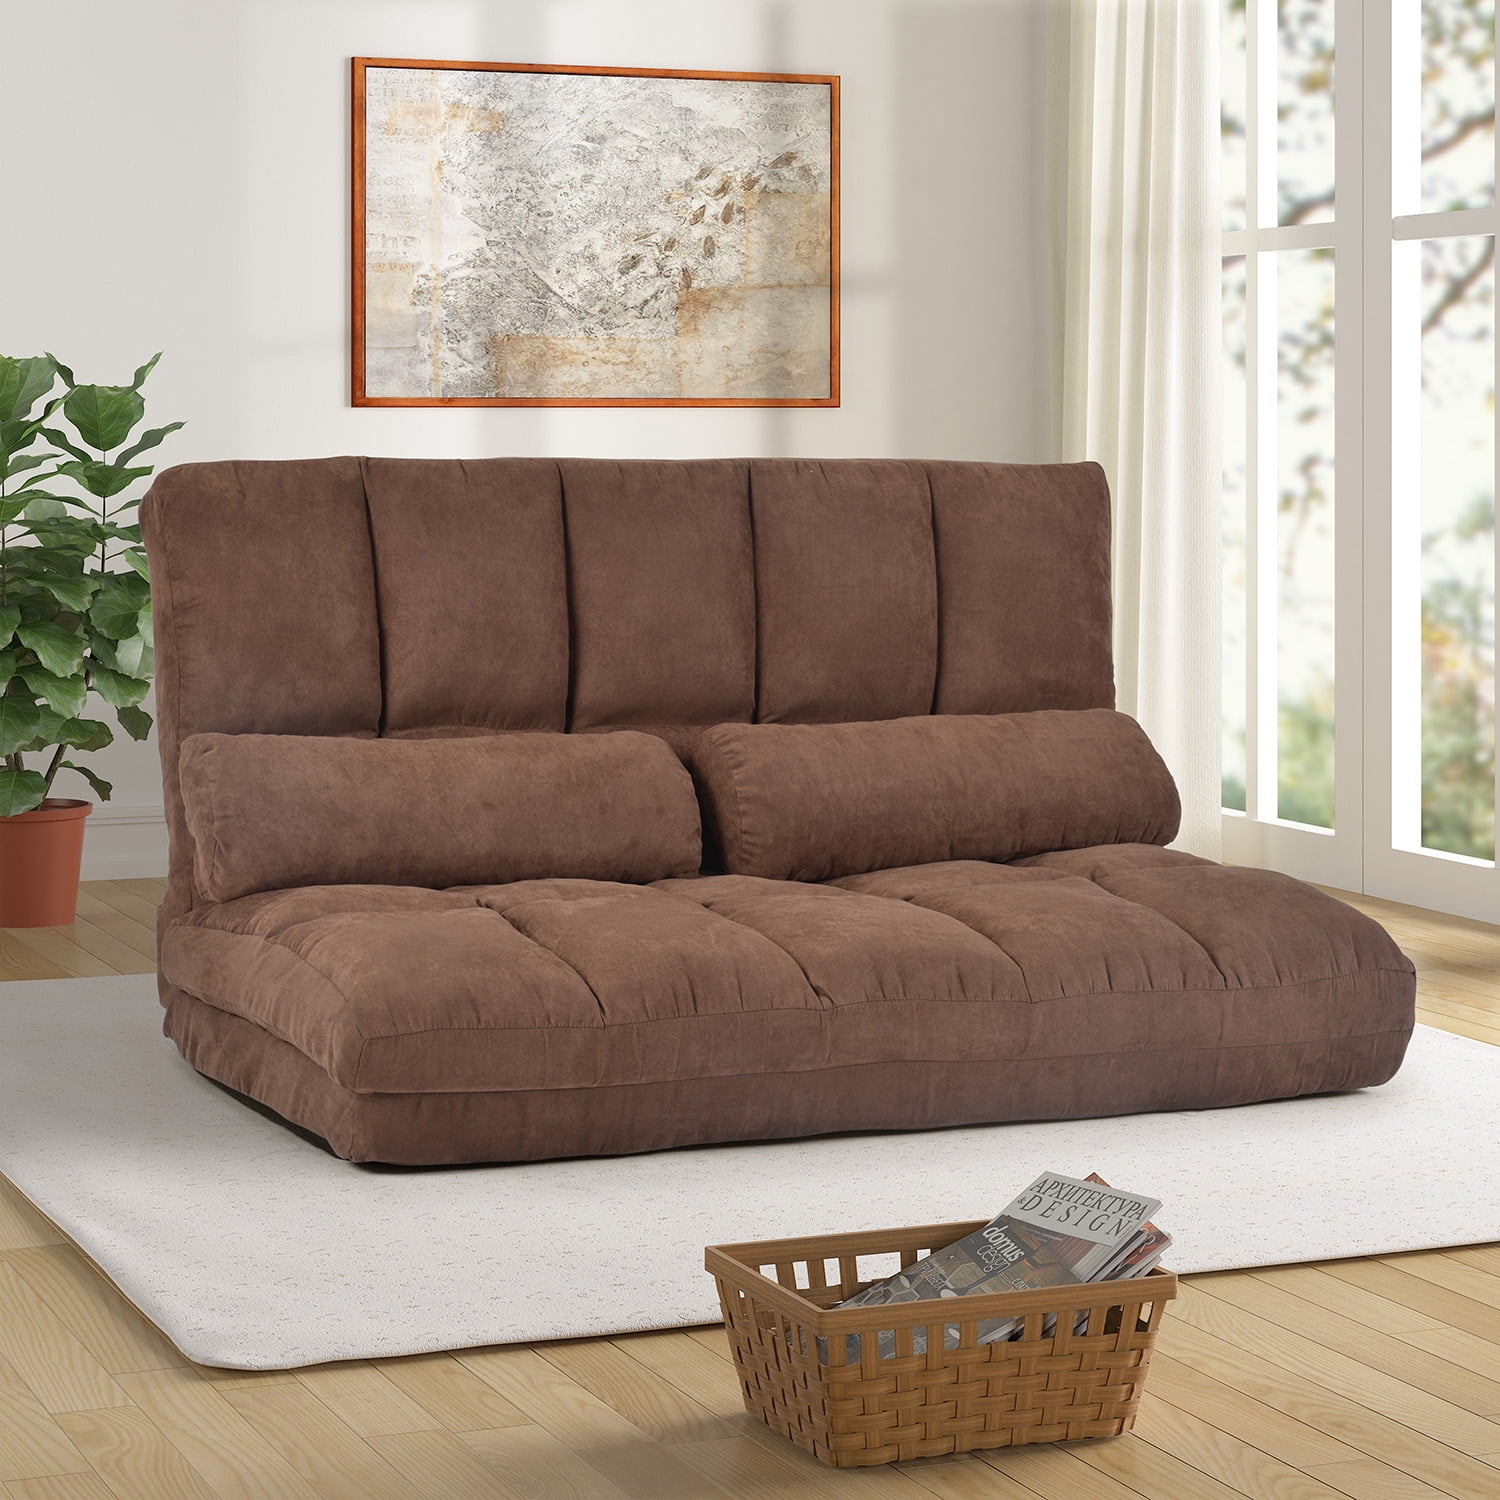 Double Chaise Lounge Sofa, Floor Sofa Bed Adjustable Sleeper Bed Futon Bed Couches Reclining Sofa Lazy with Two Pillows - Walmart.com